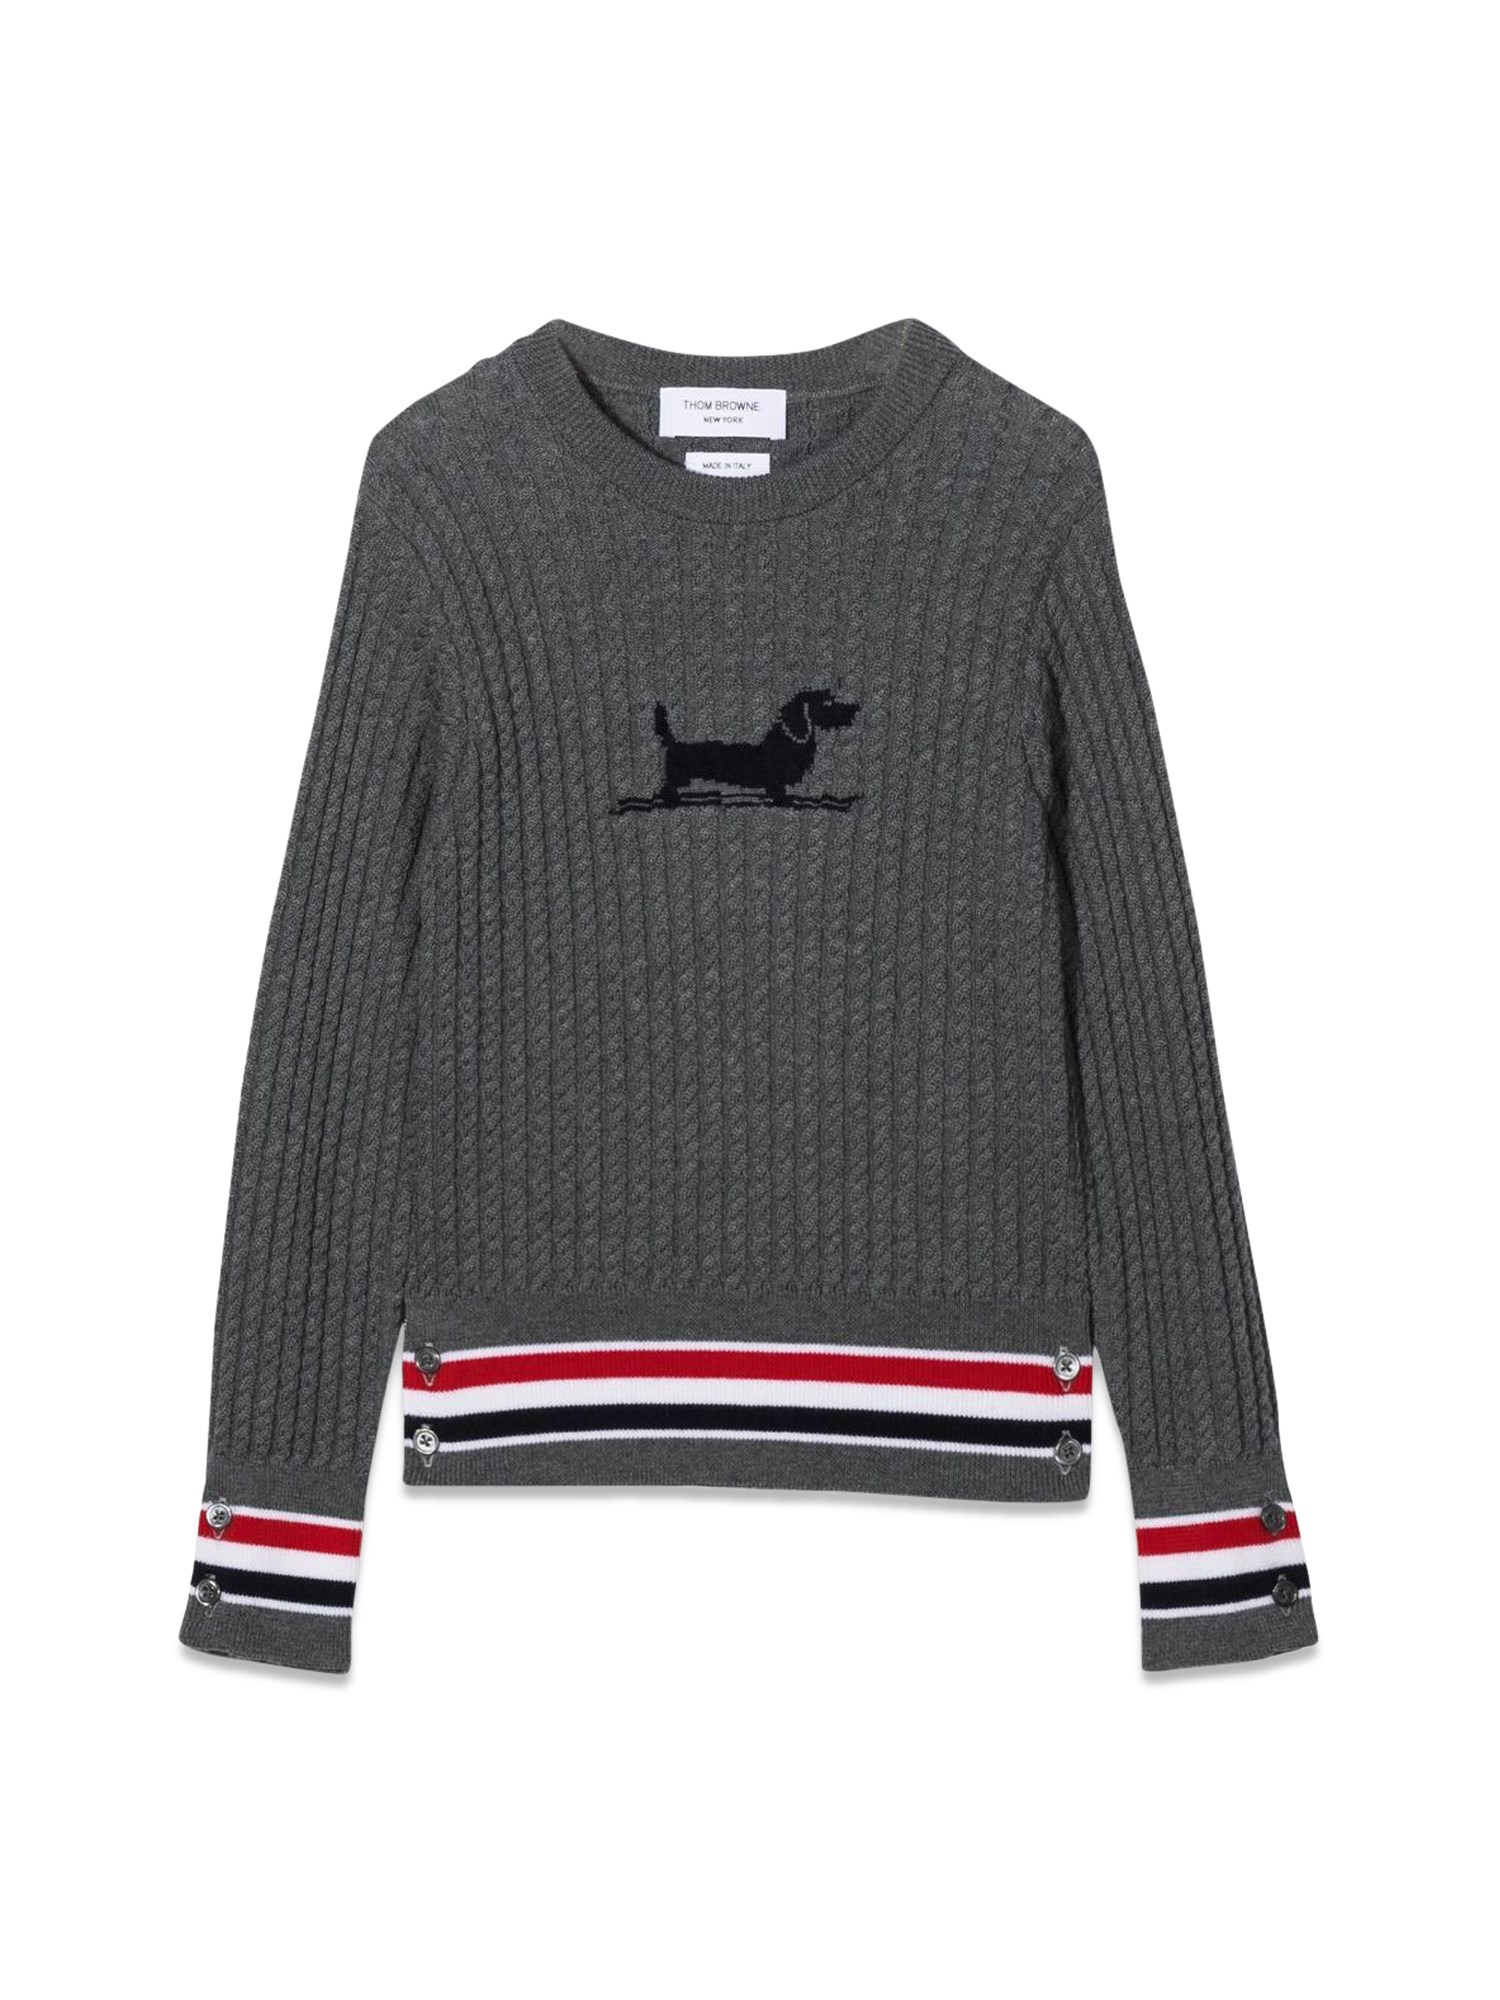 thom browne baby cable crewneck pullover